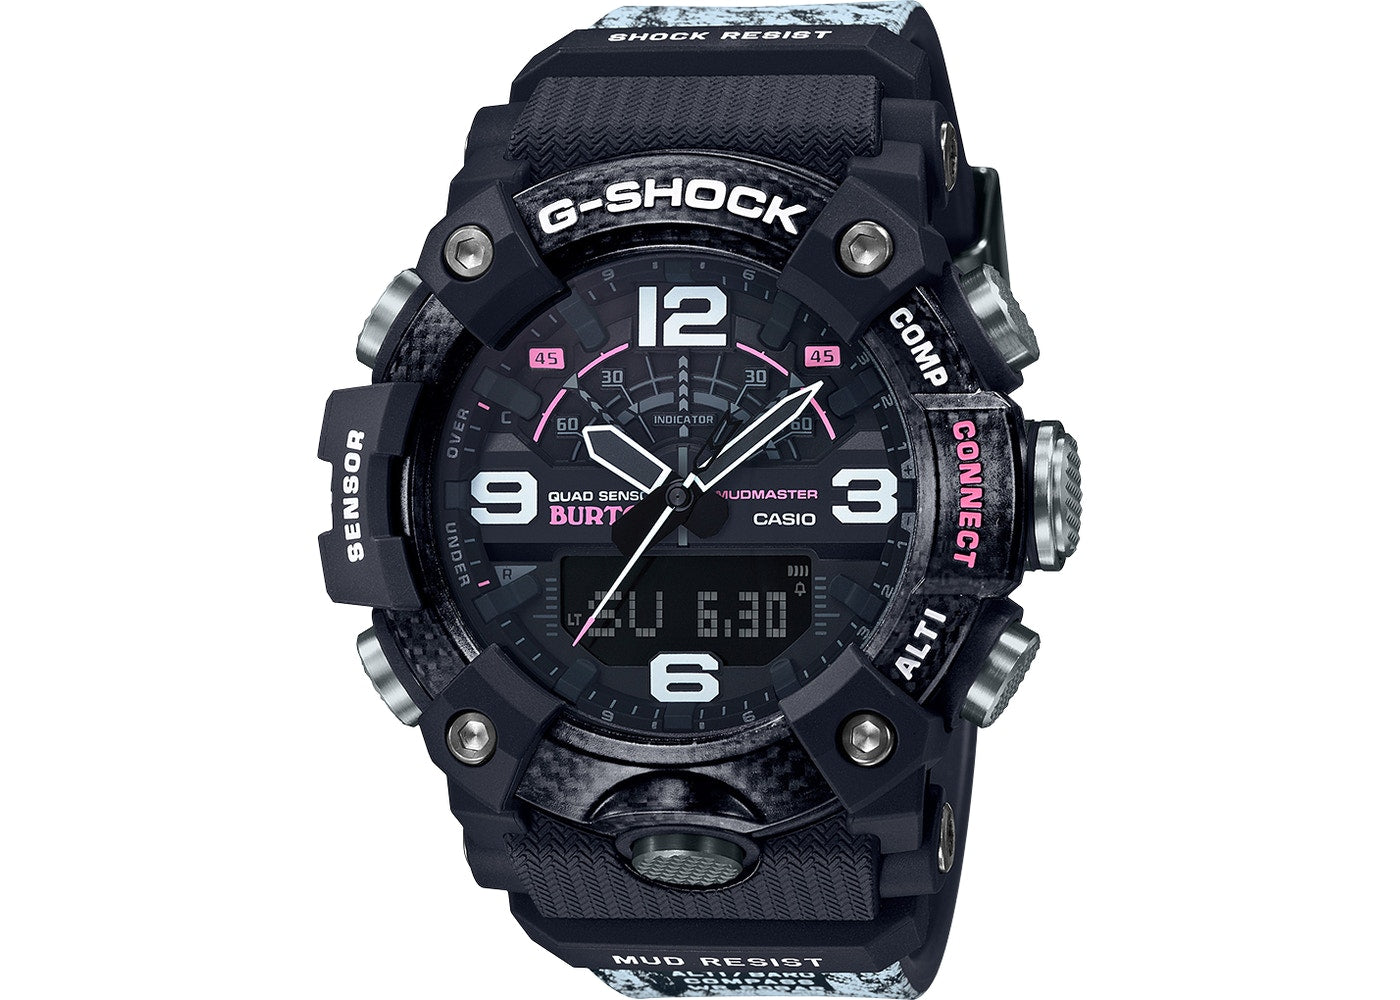 The bold design of this G-Shock has many prominent features such as the large gray front and side buttons, black and silver outlined hands, large numerals, and unique band. The watch is mainly black with some stylish pattern on the case and purple/pink accents within the face.